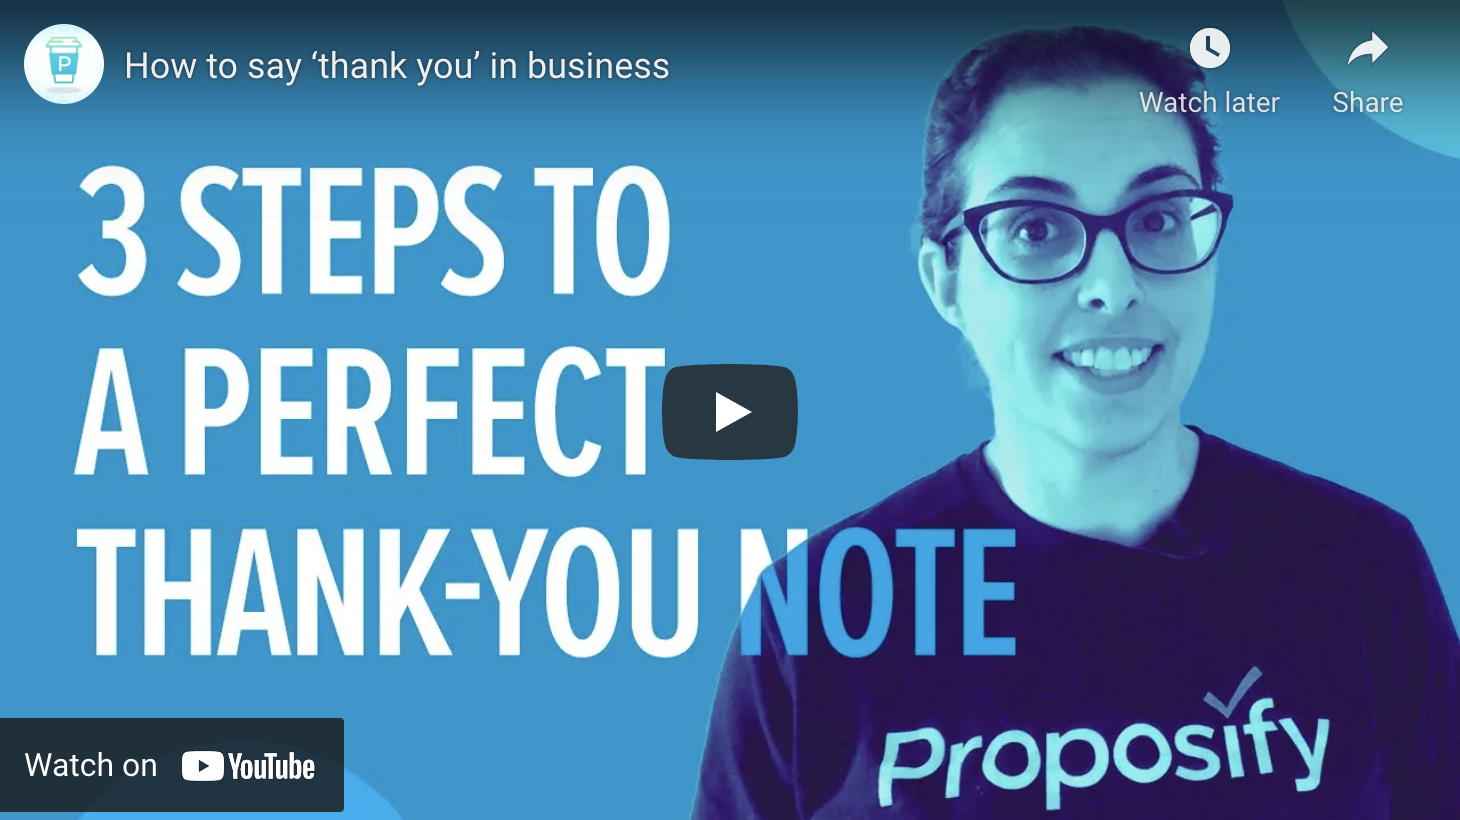 Lauren d'Entremont beside the title "3 Steps to A Perfect Thank-You Note"